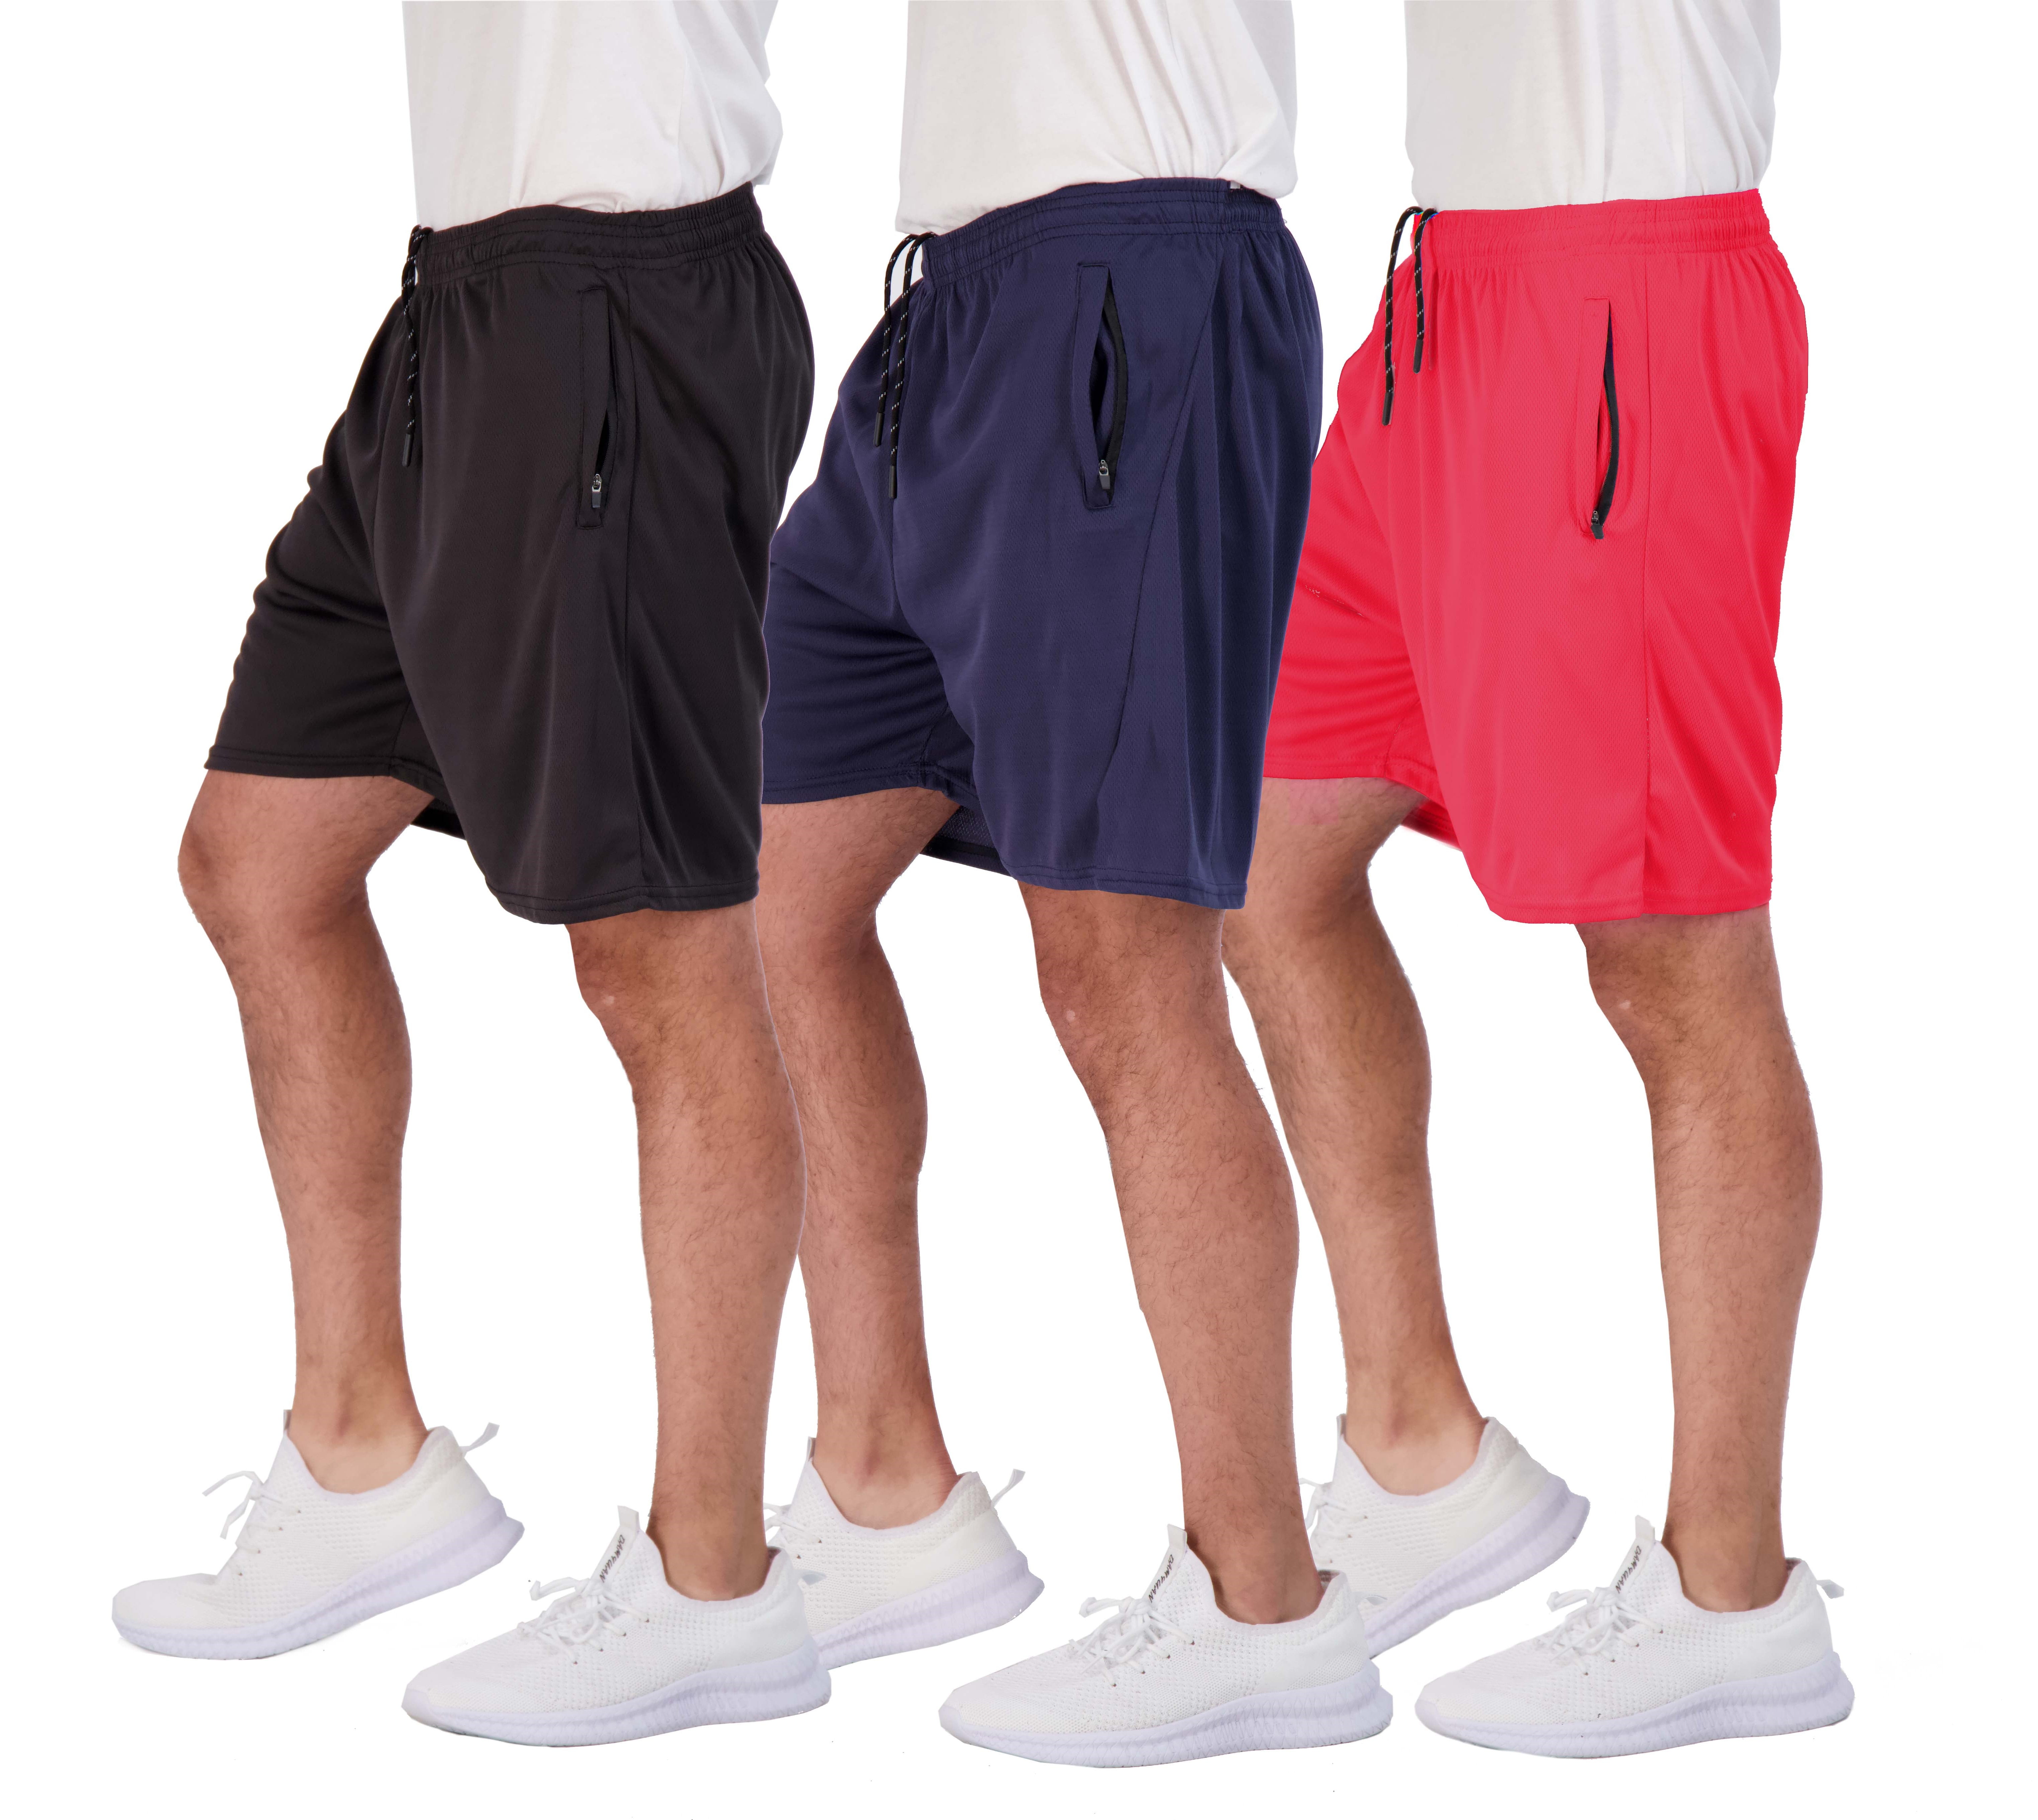 Real Essentials 5 Pack Men's Mesh Athletic Performance Gym Shorts with Pockets S-3X 